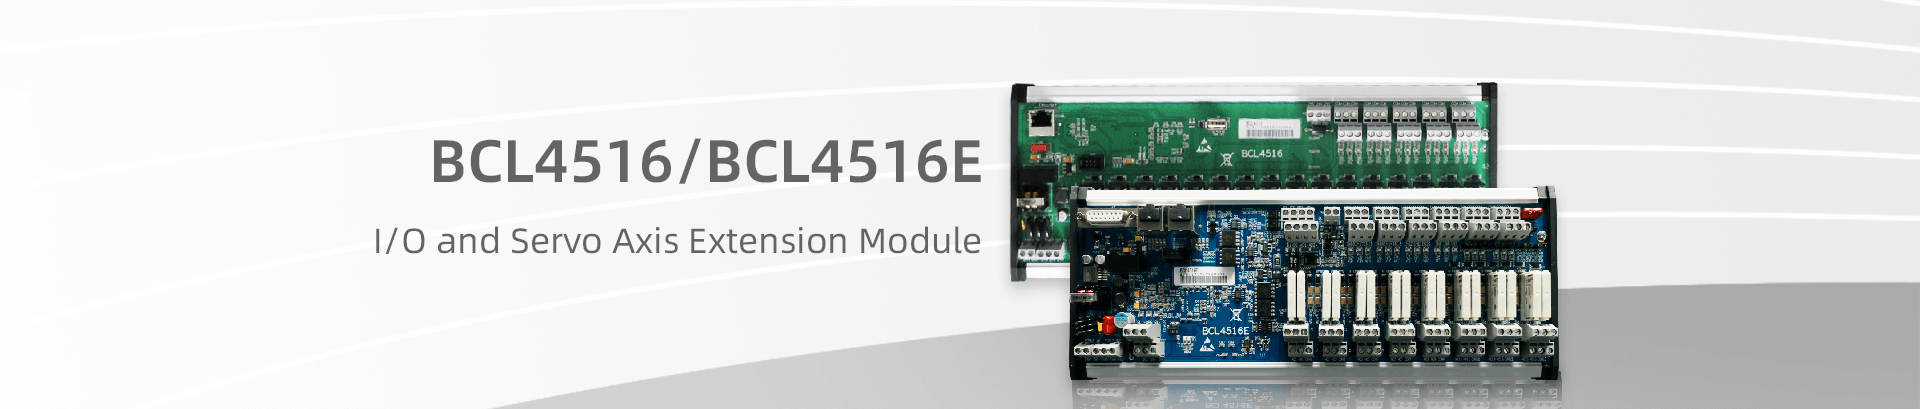 BCL4516EBCL4516E IO and servo axis extension modules2